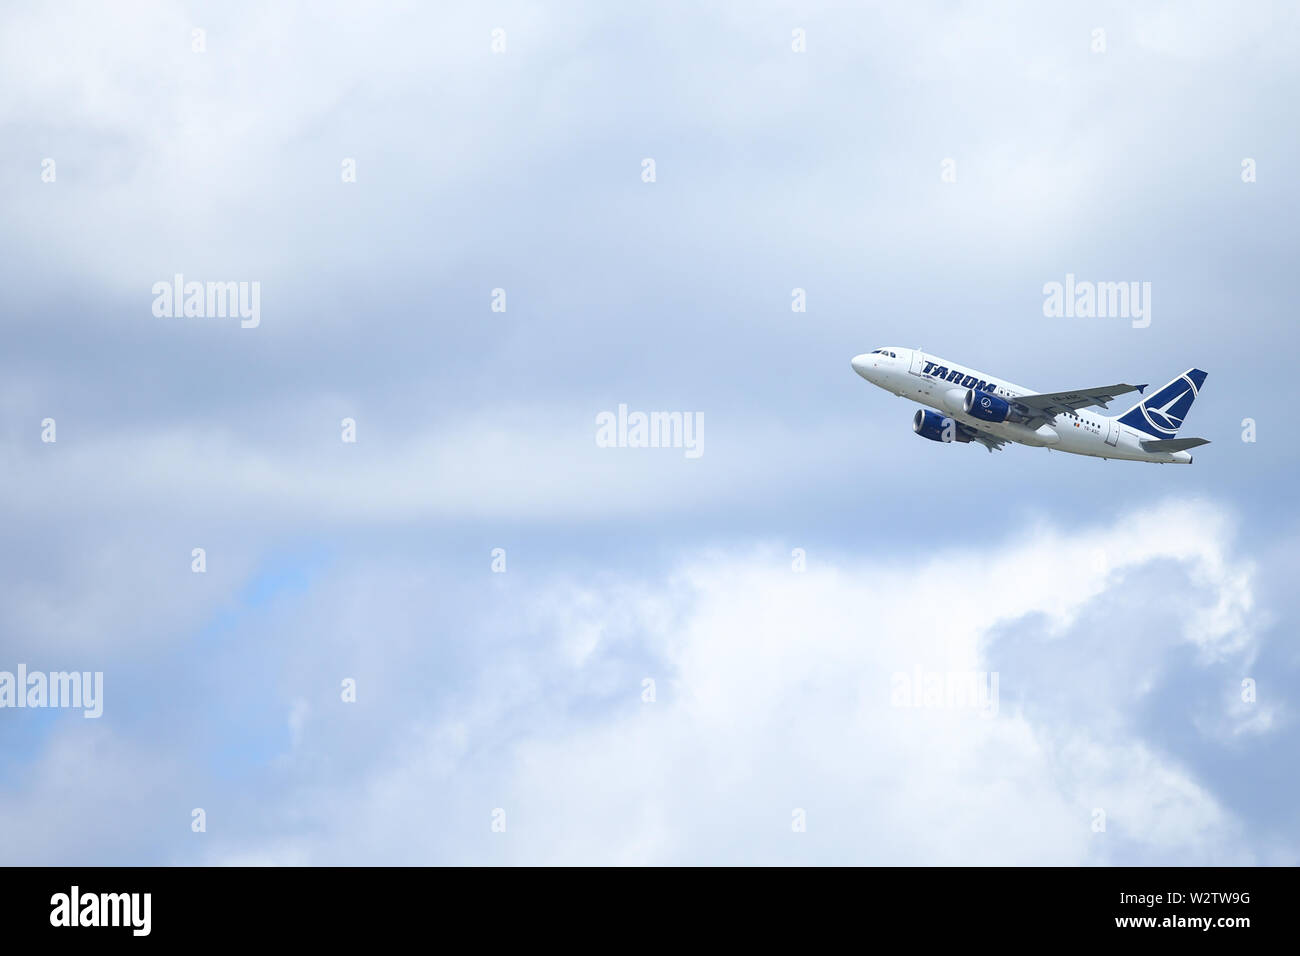 Otopeni, Romania - May 22, 2019: A TAROM commercial airplane is taking off from the Henri Coanda International Airport. Stock Photo